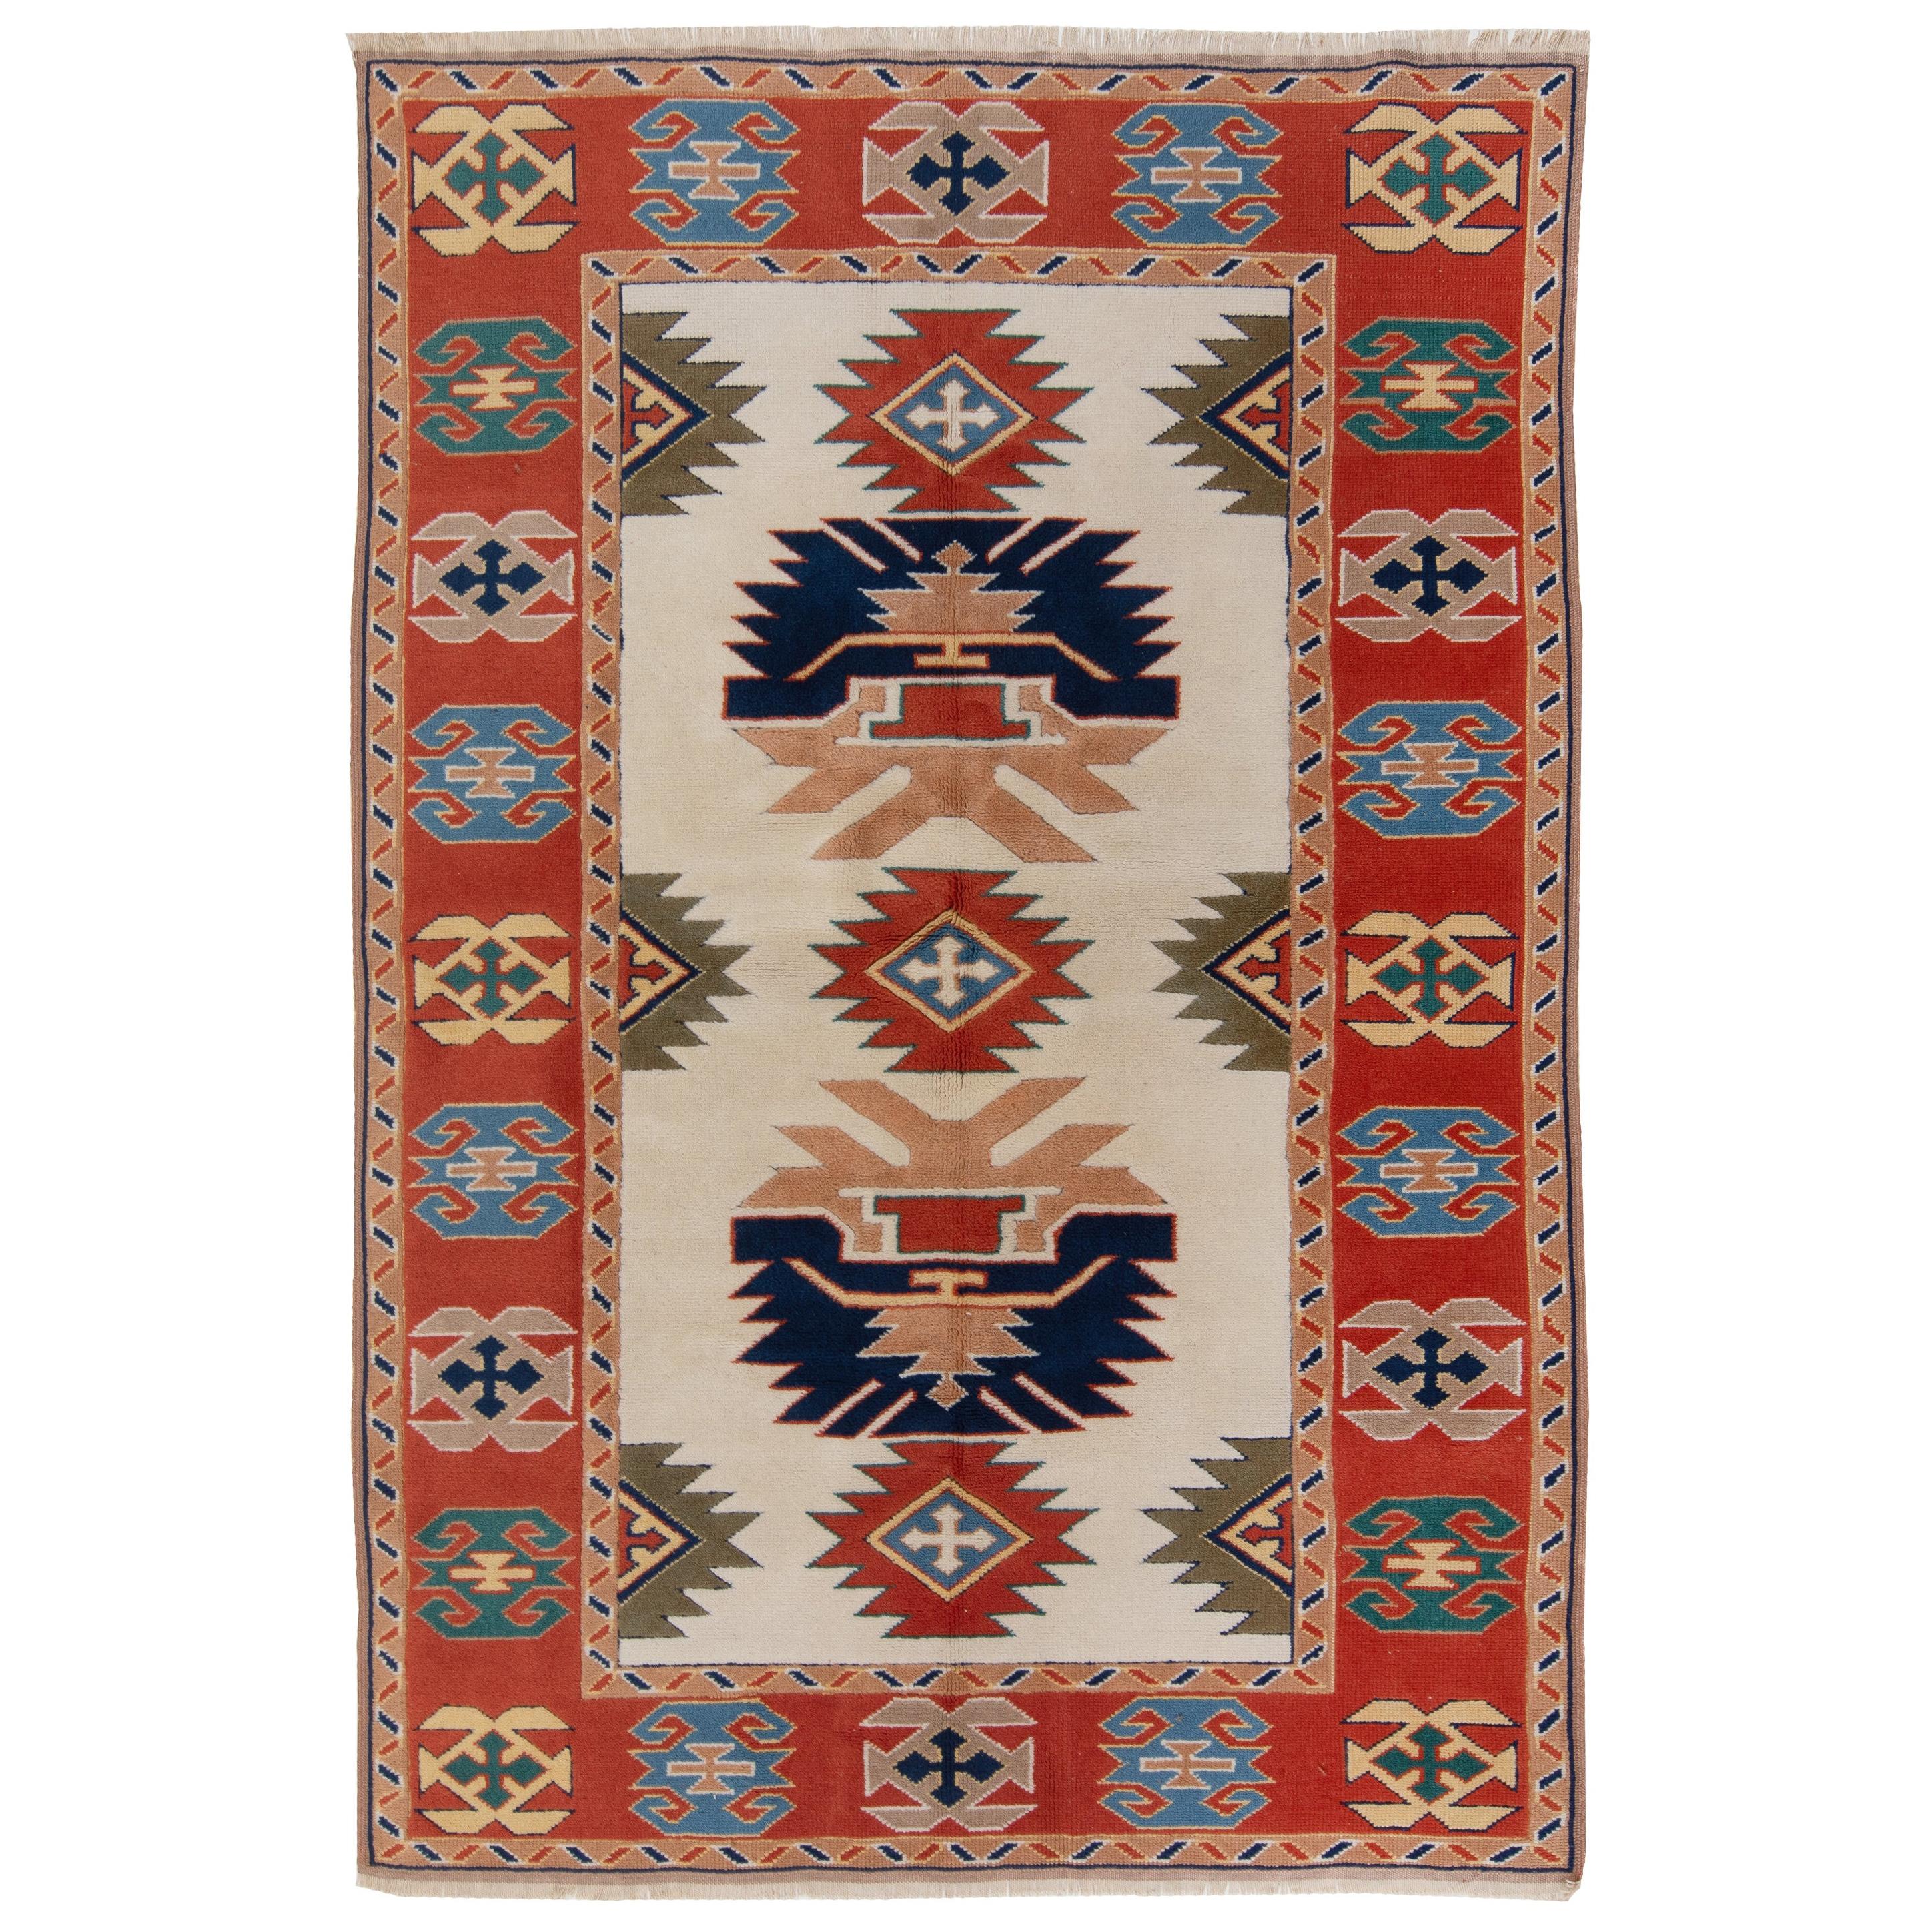 5.3x7.4 Ft Fine Hand Knotted Vintage Anatolian Area Rug with All Natural Dyes